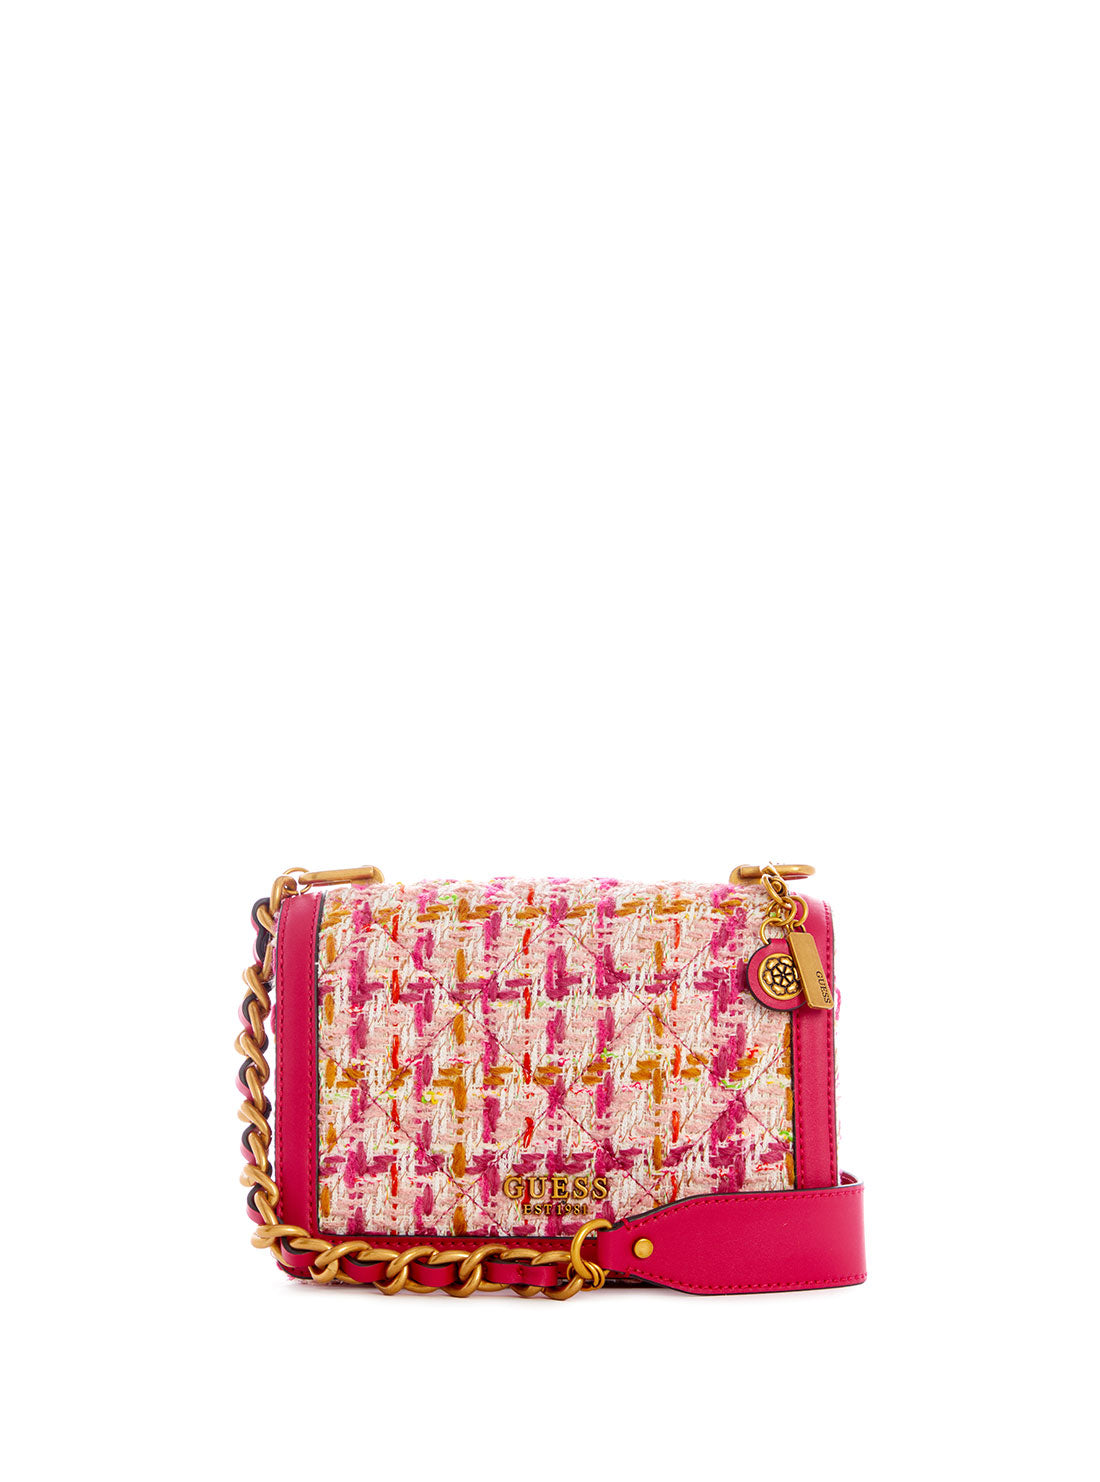 GUESS Womens Hot Pink Abey Crossbody Bag TH855821 Front View